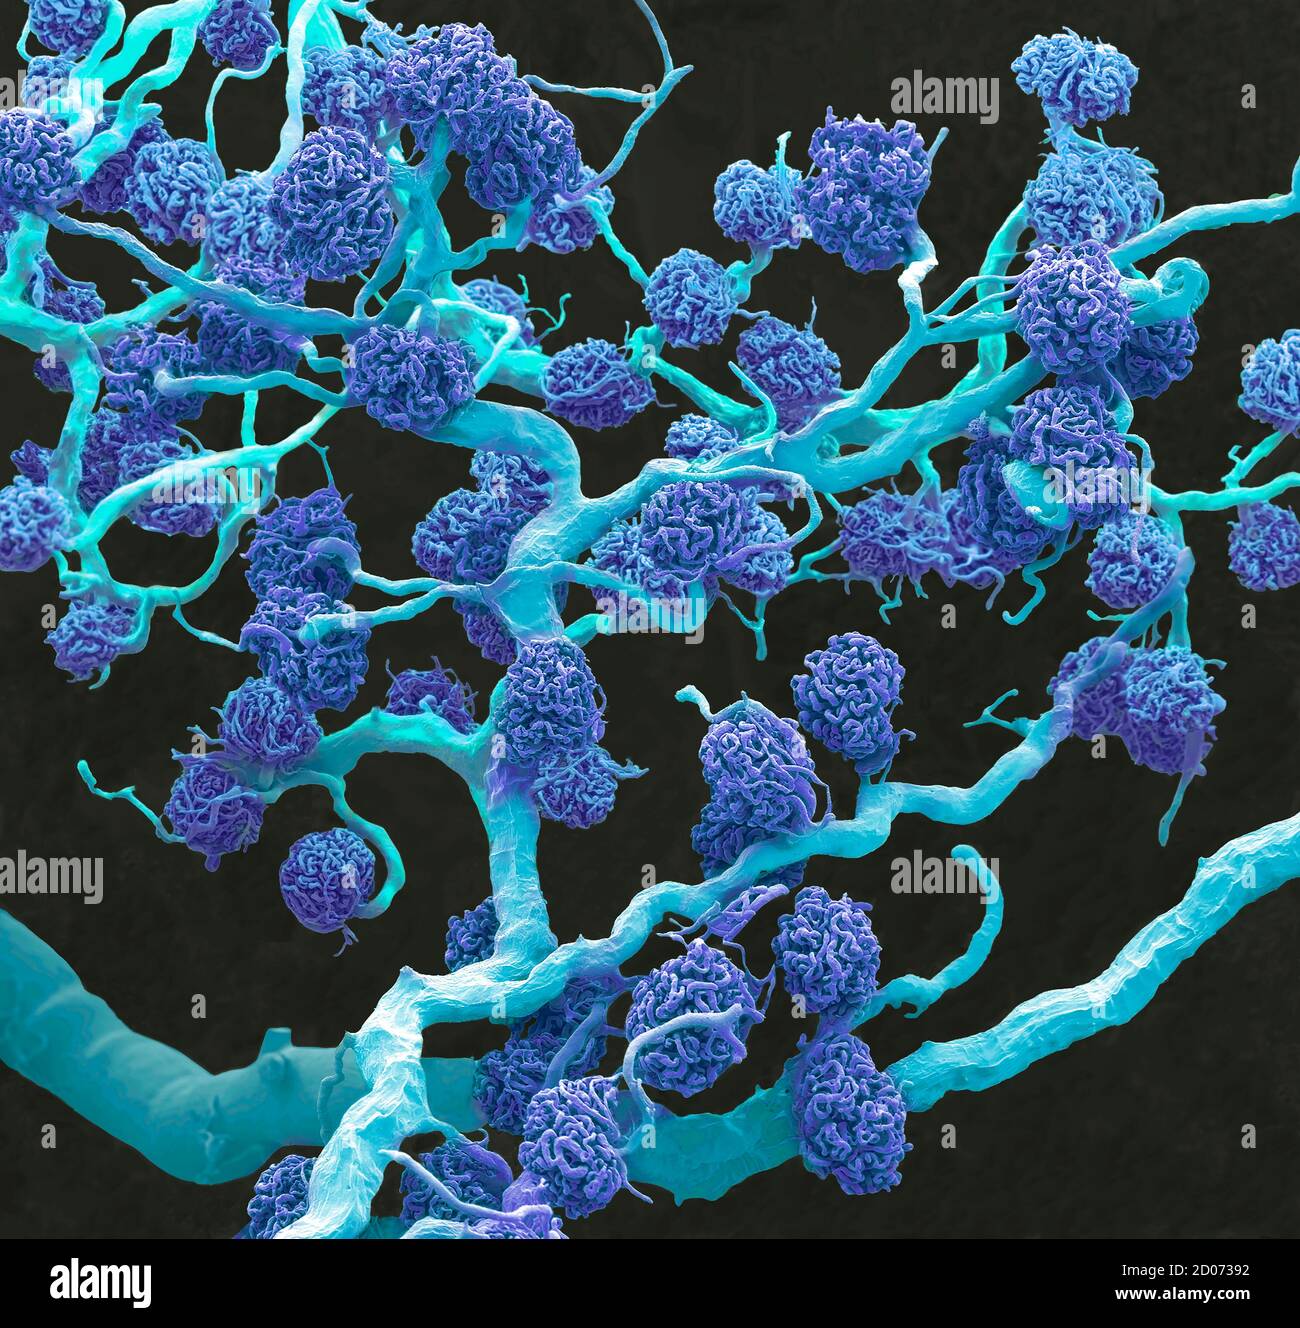 Kidney glomeruli. Coloured scanning electron micrograph (SEM) of a resin cast of glomeruli capillaries and the larger blood vessels supplying them wit Stock Photo